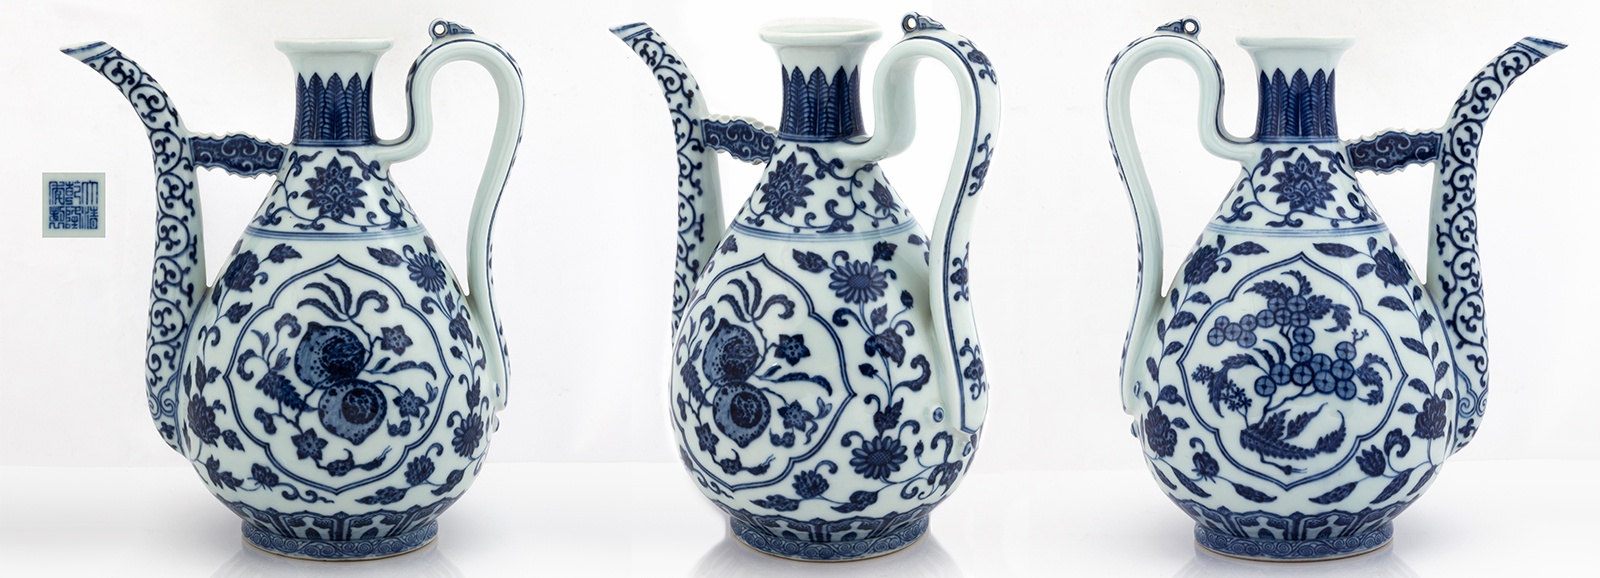 Rare Chinese Ming-style Blue and White Ewer